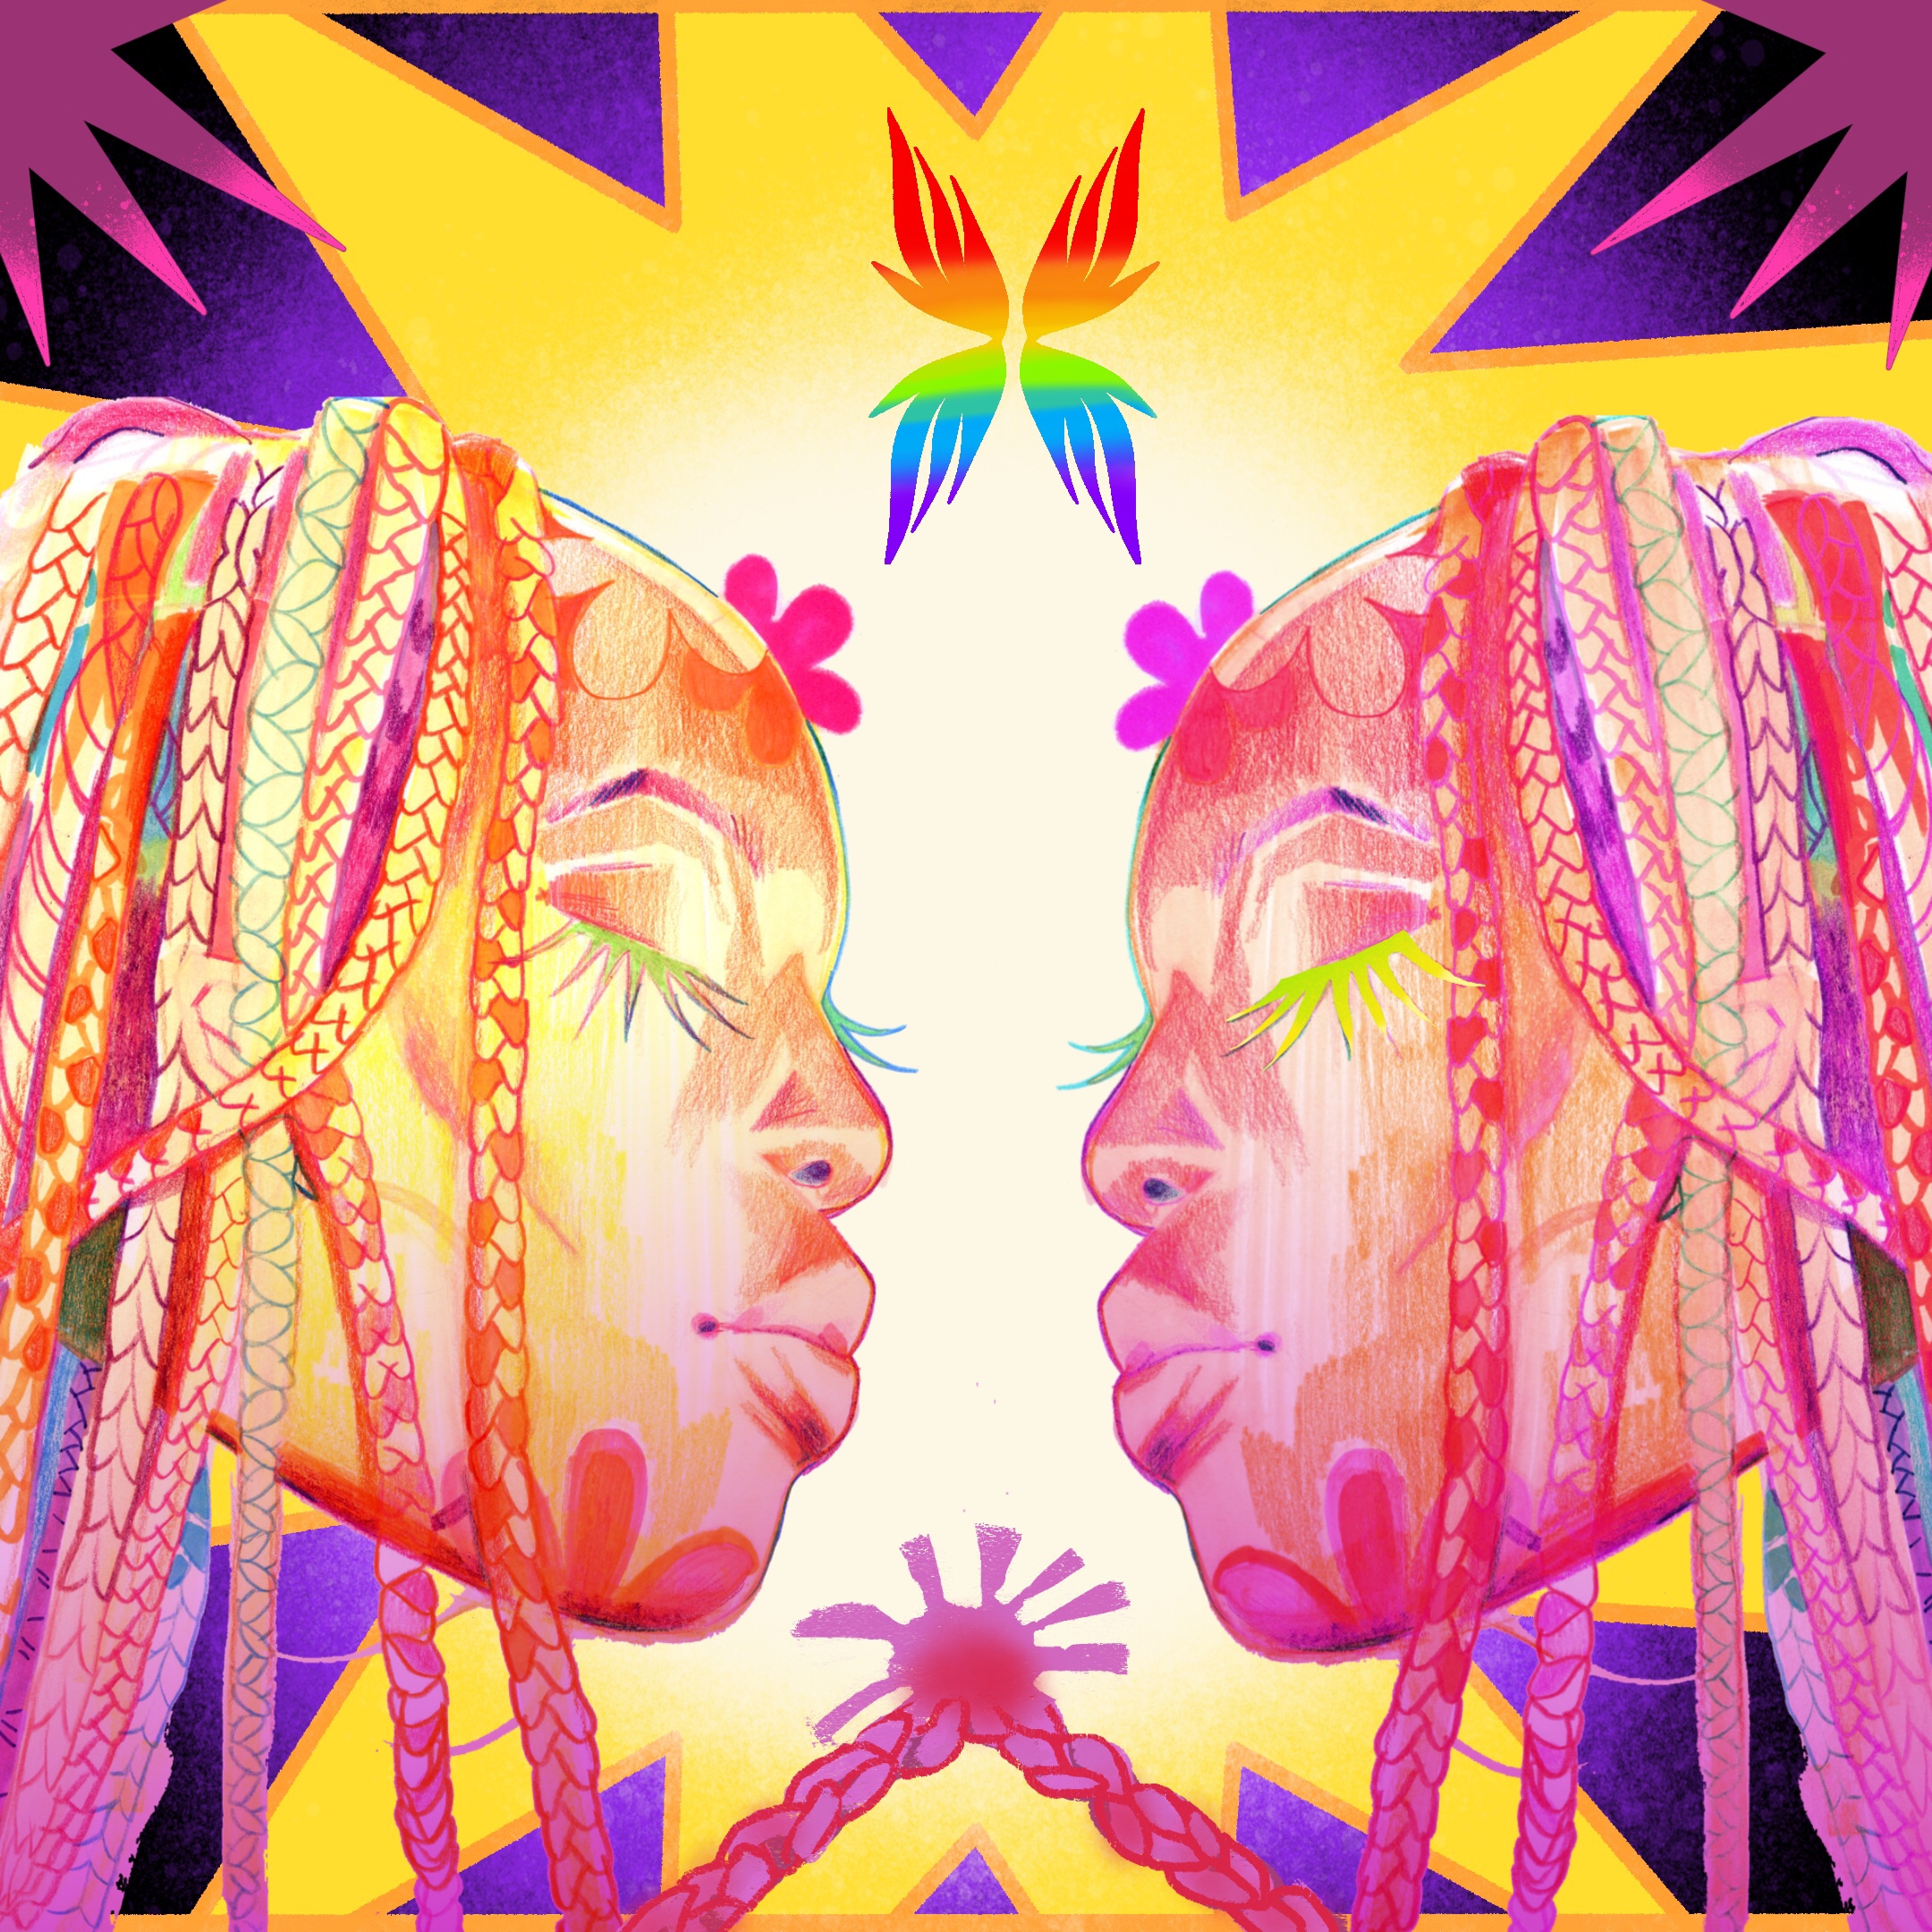 Concept art depicting two Black females with braids and eyes closed with wispy eyelashes, and the two figures are mirroring each other. The background has symmetrical and geometric shapes with a rainbow-coloured feather or butterfly image above the females. The colour palette of the art is warm shades of pink, purple, orange, and yellow.